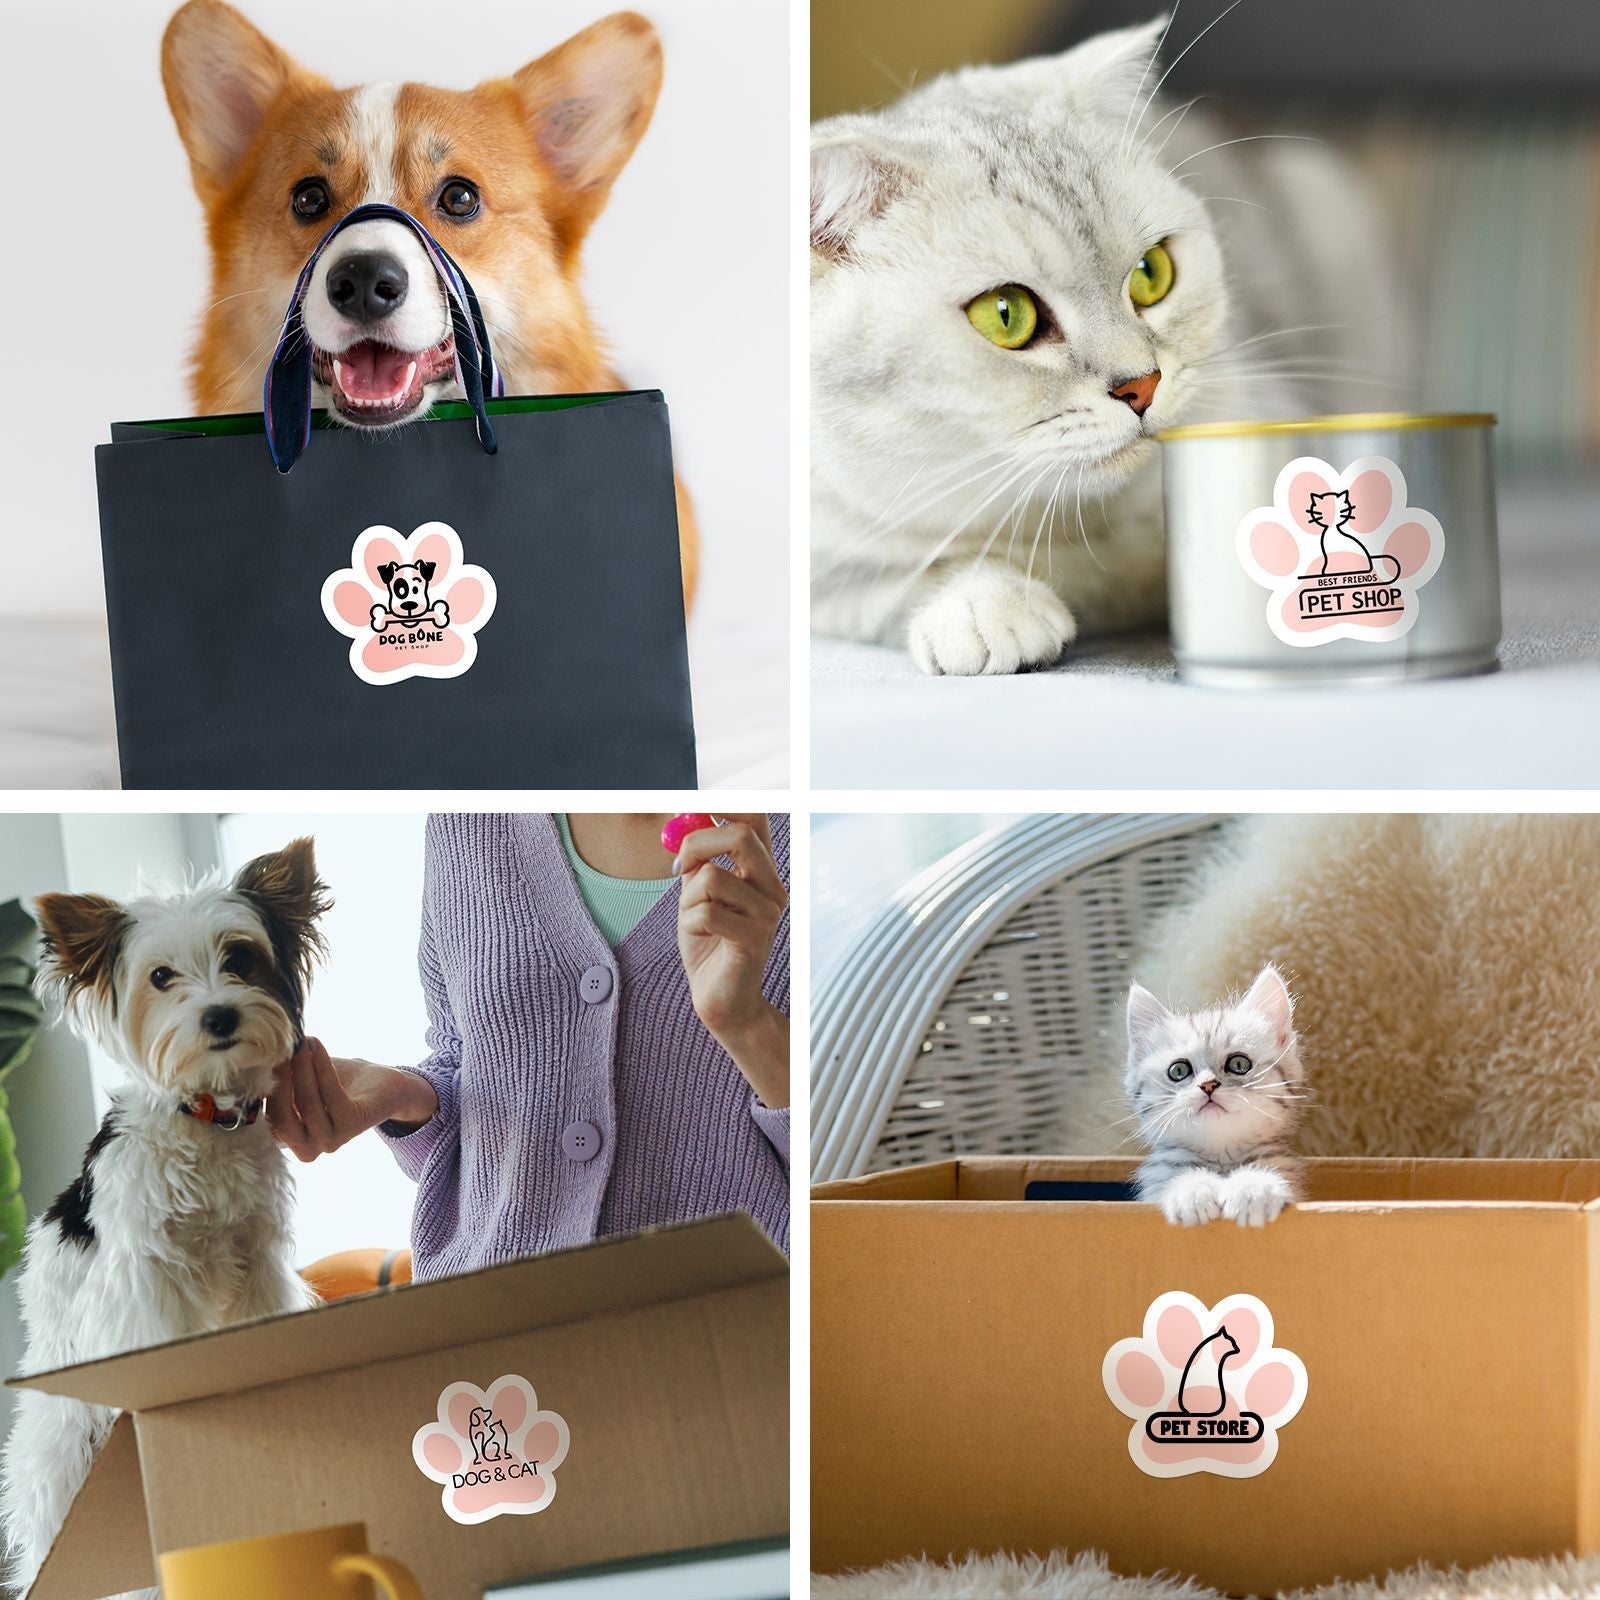 MUNBYN personalised labels are shaped like paws, which makes them perfect for labeling pet-related items or as a playful gift tag.